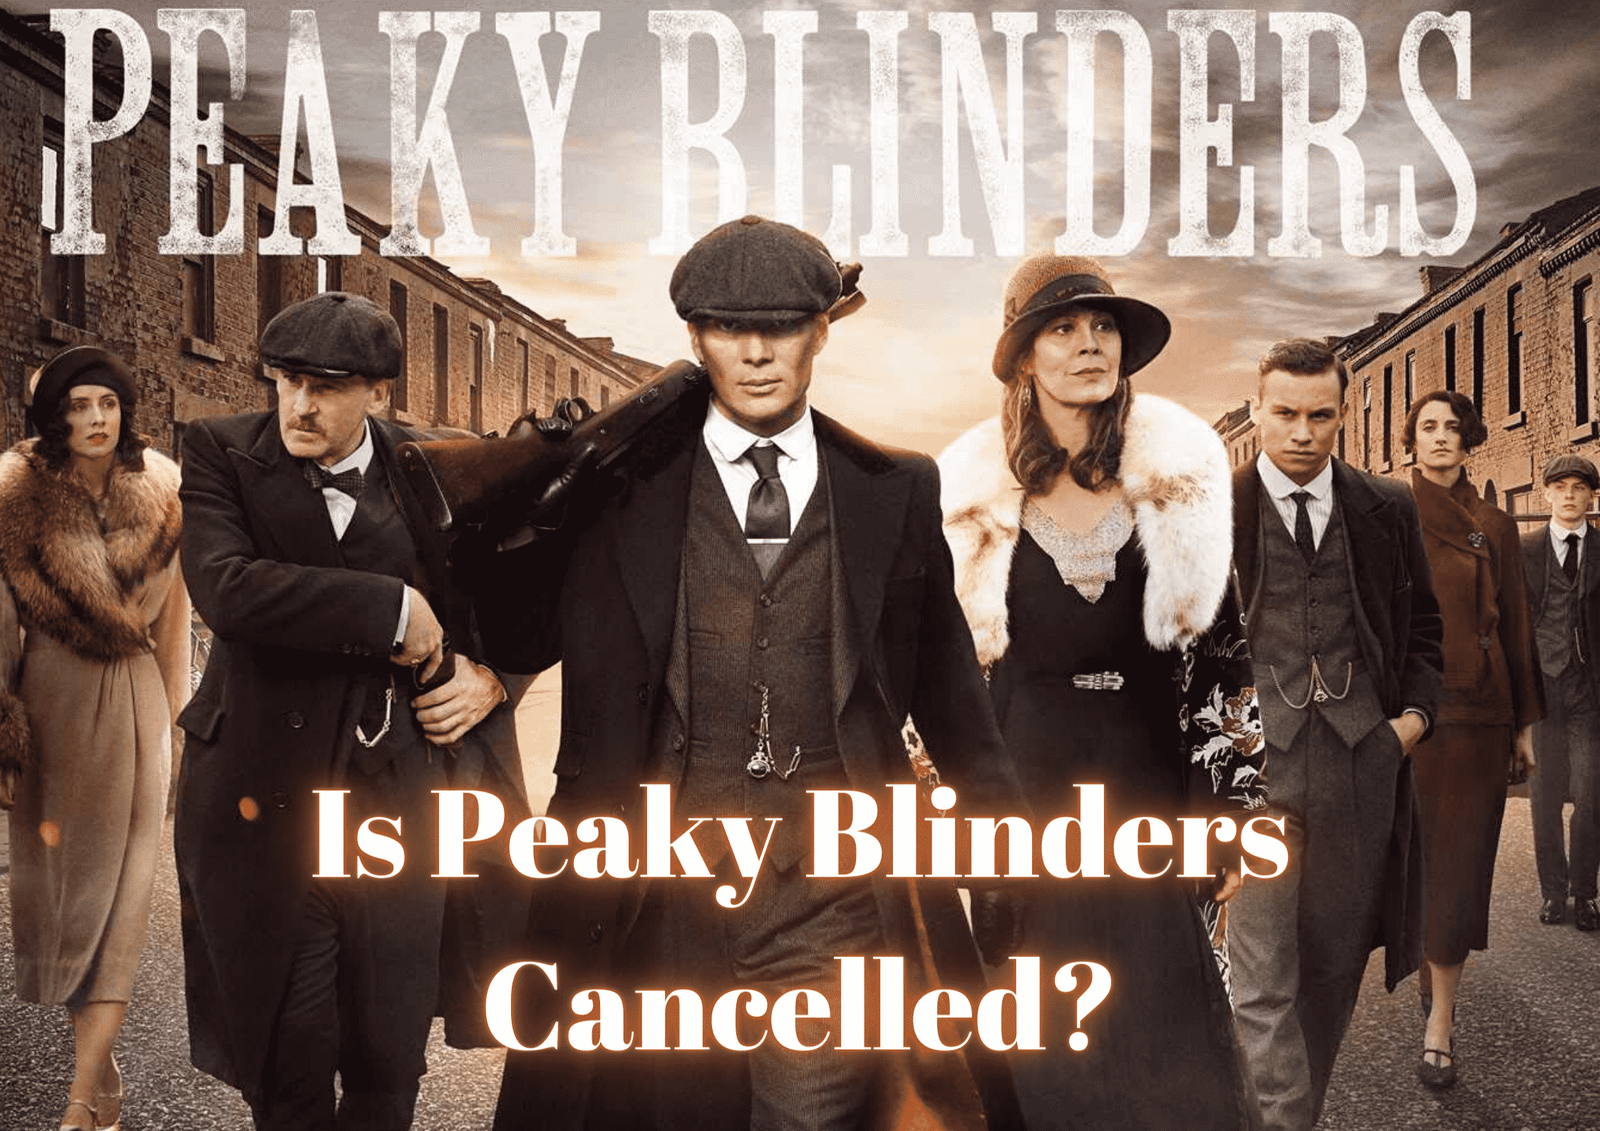 Is Peaky Blinders Cancelled?